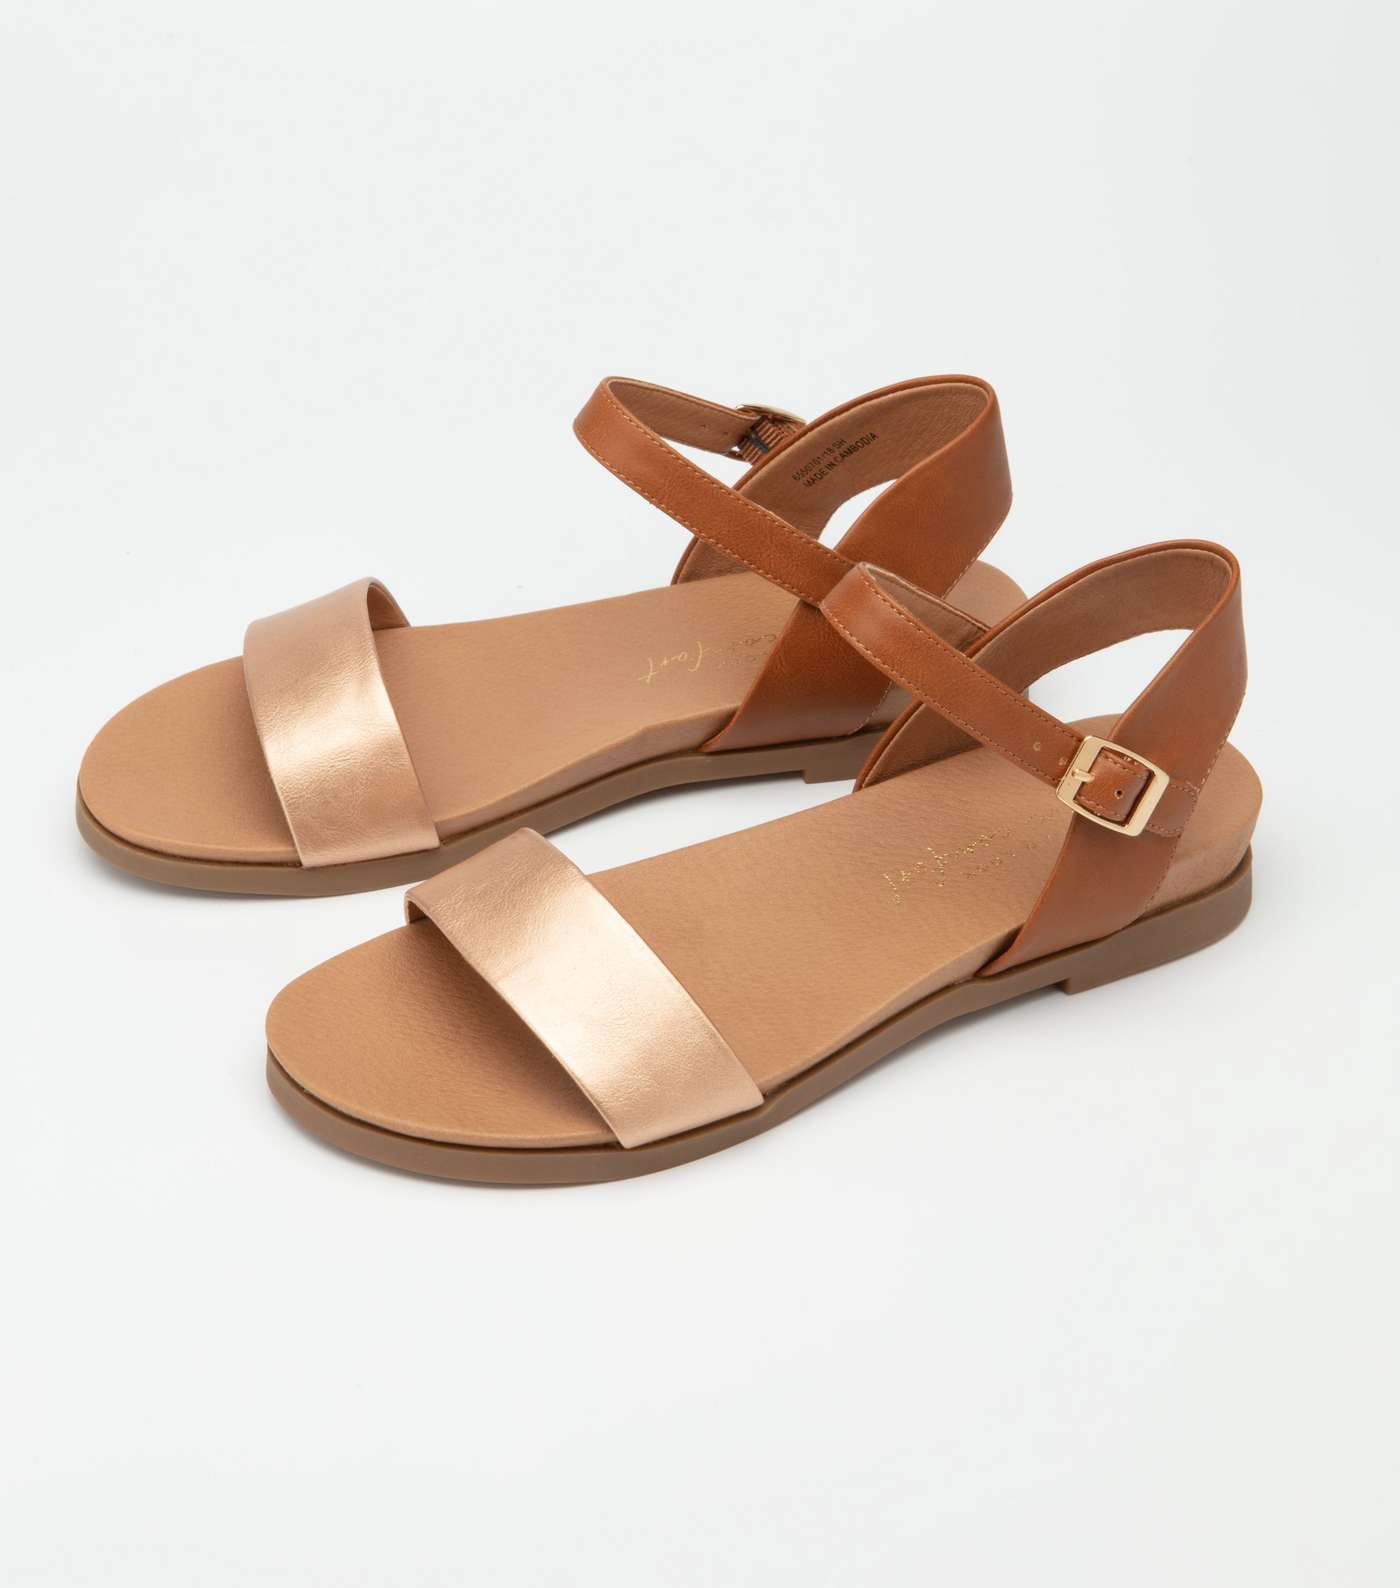 Tan Leather-Look Metallic Footbed Sandals Image 2